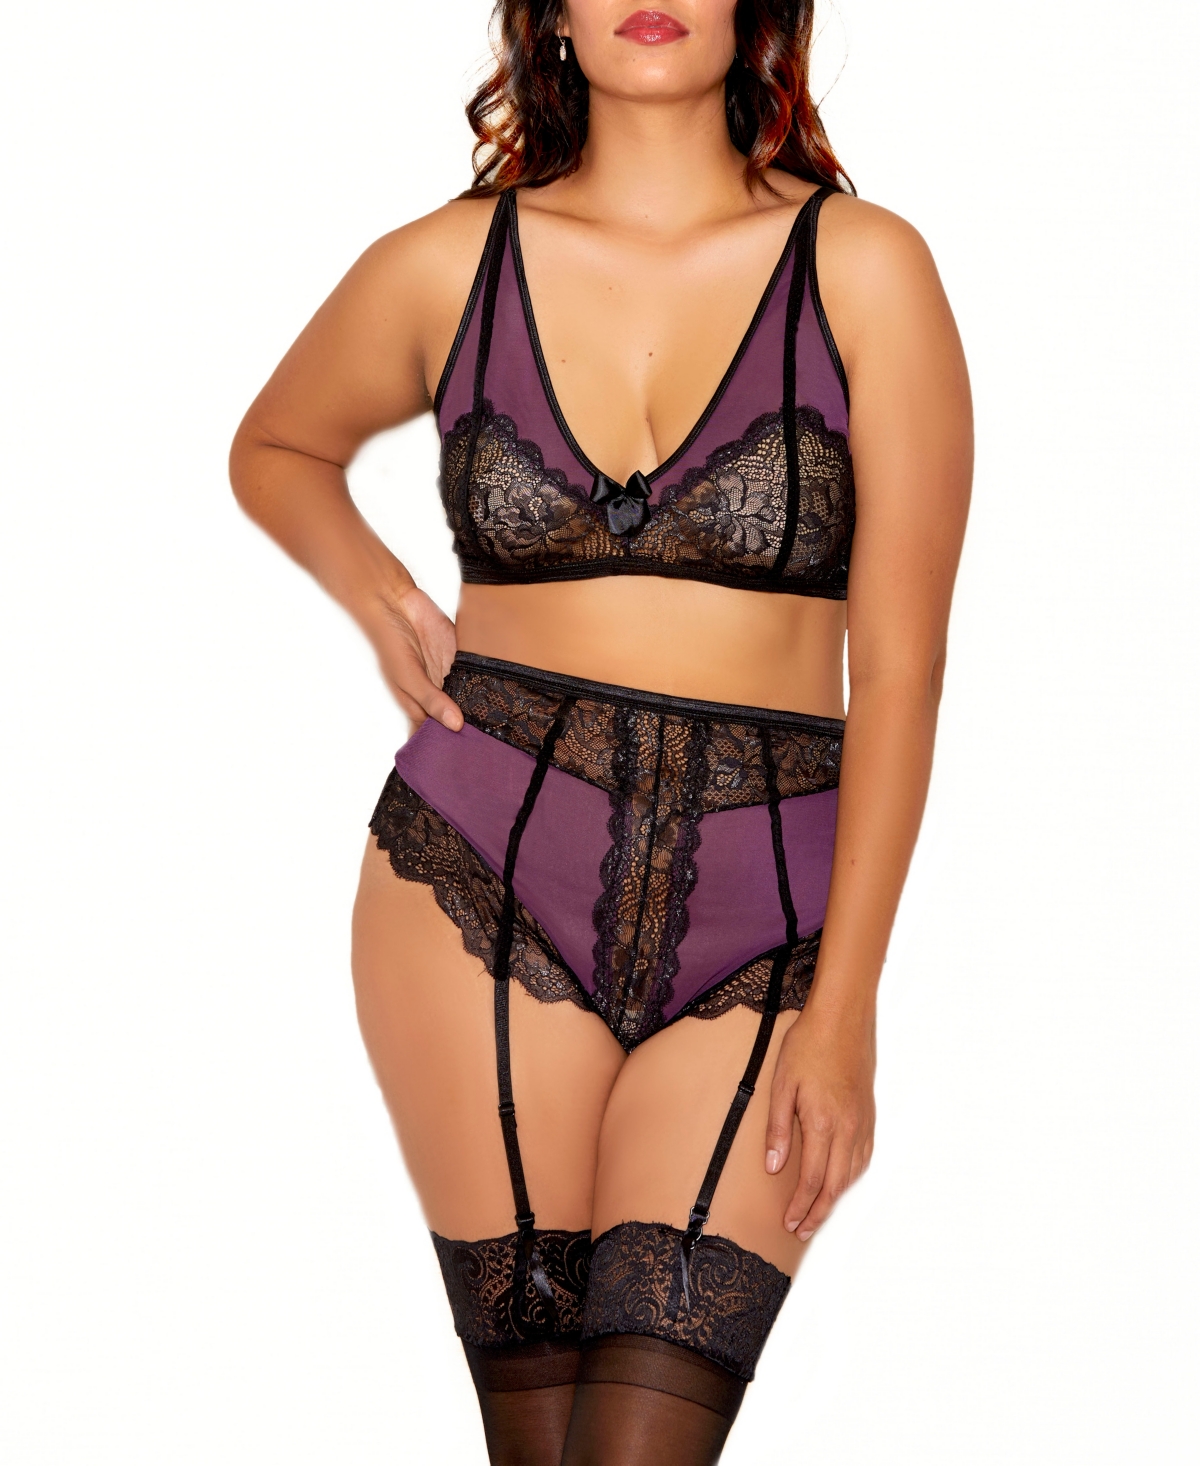 Icollection Plus Rosemary Lace And Mesh Bralette, Waist Cincher